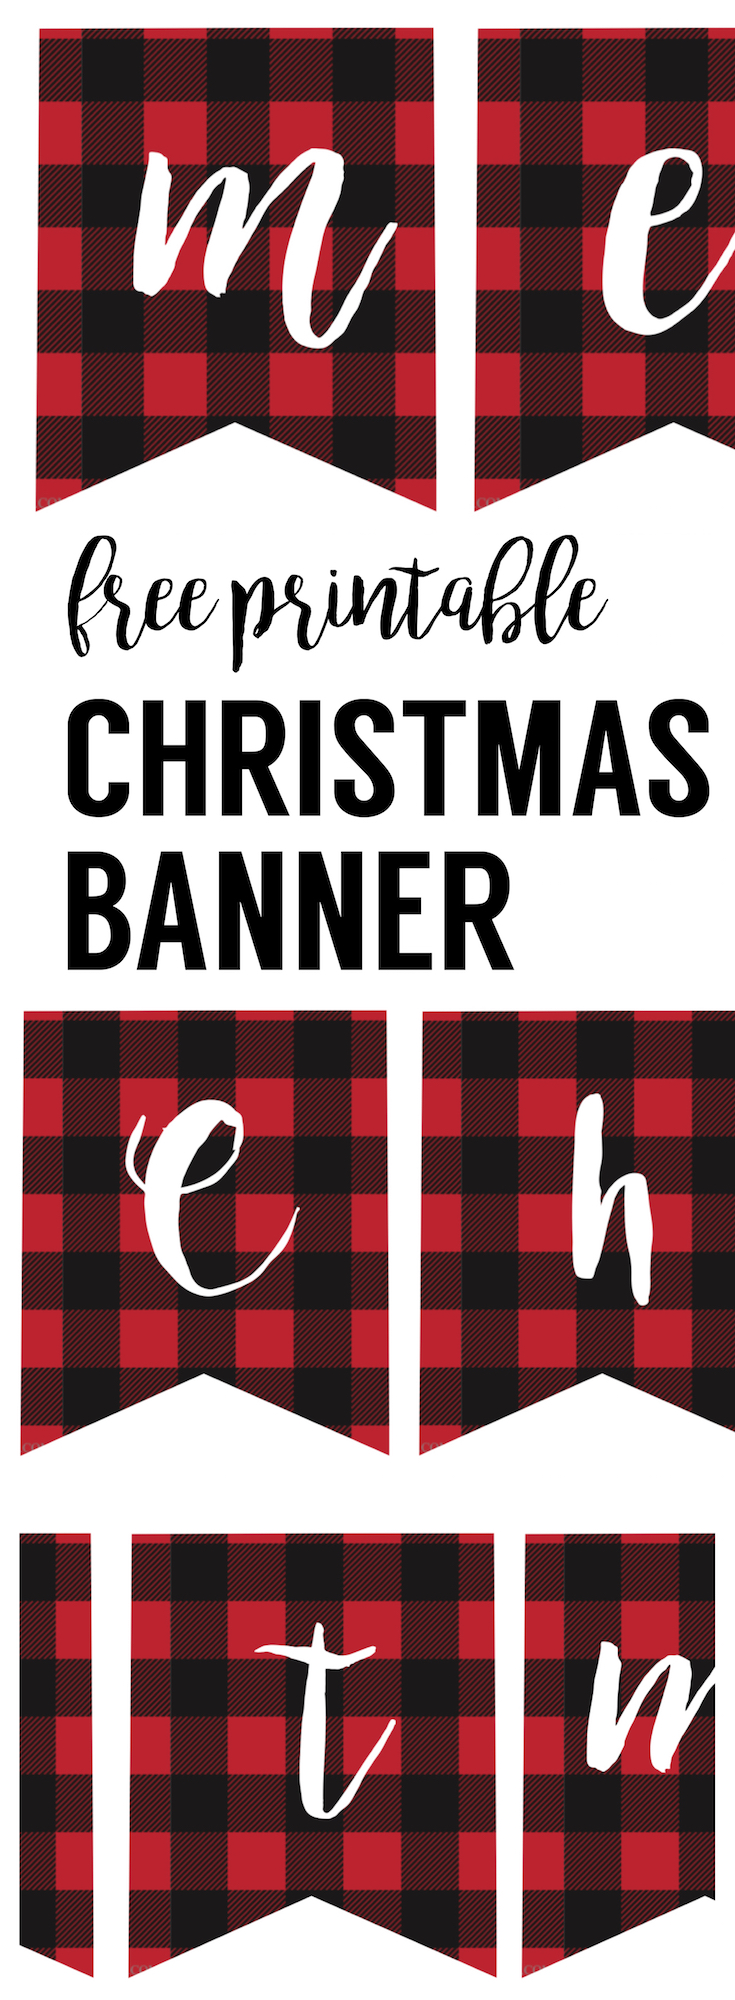 Merry Christmas Banner Template from www.papertraildesign.com